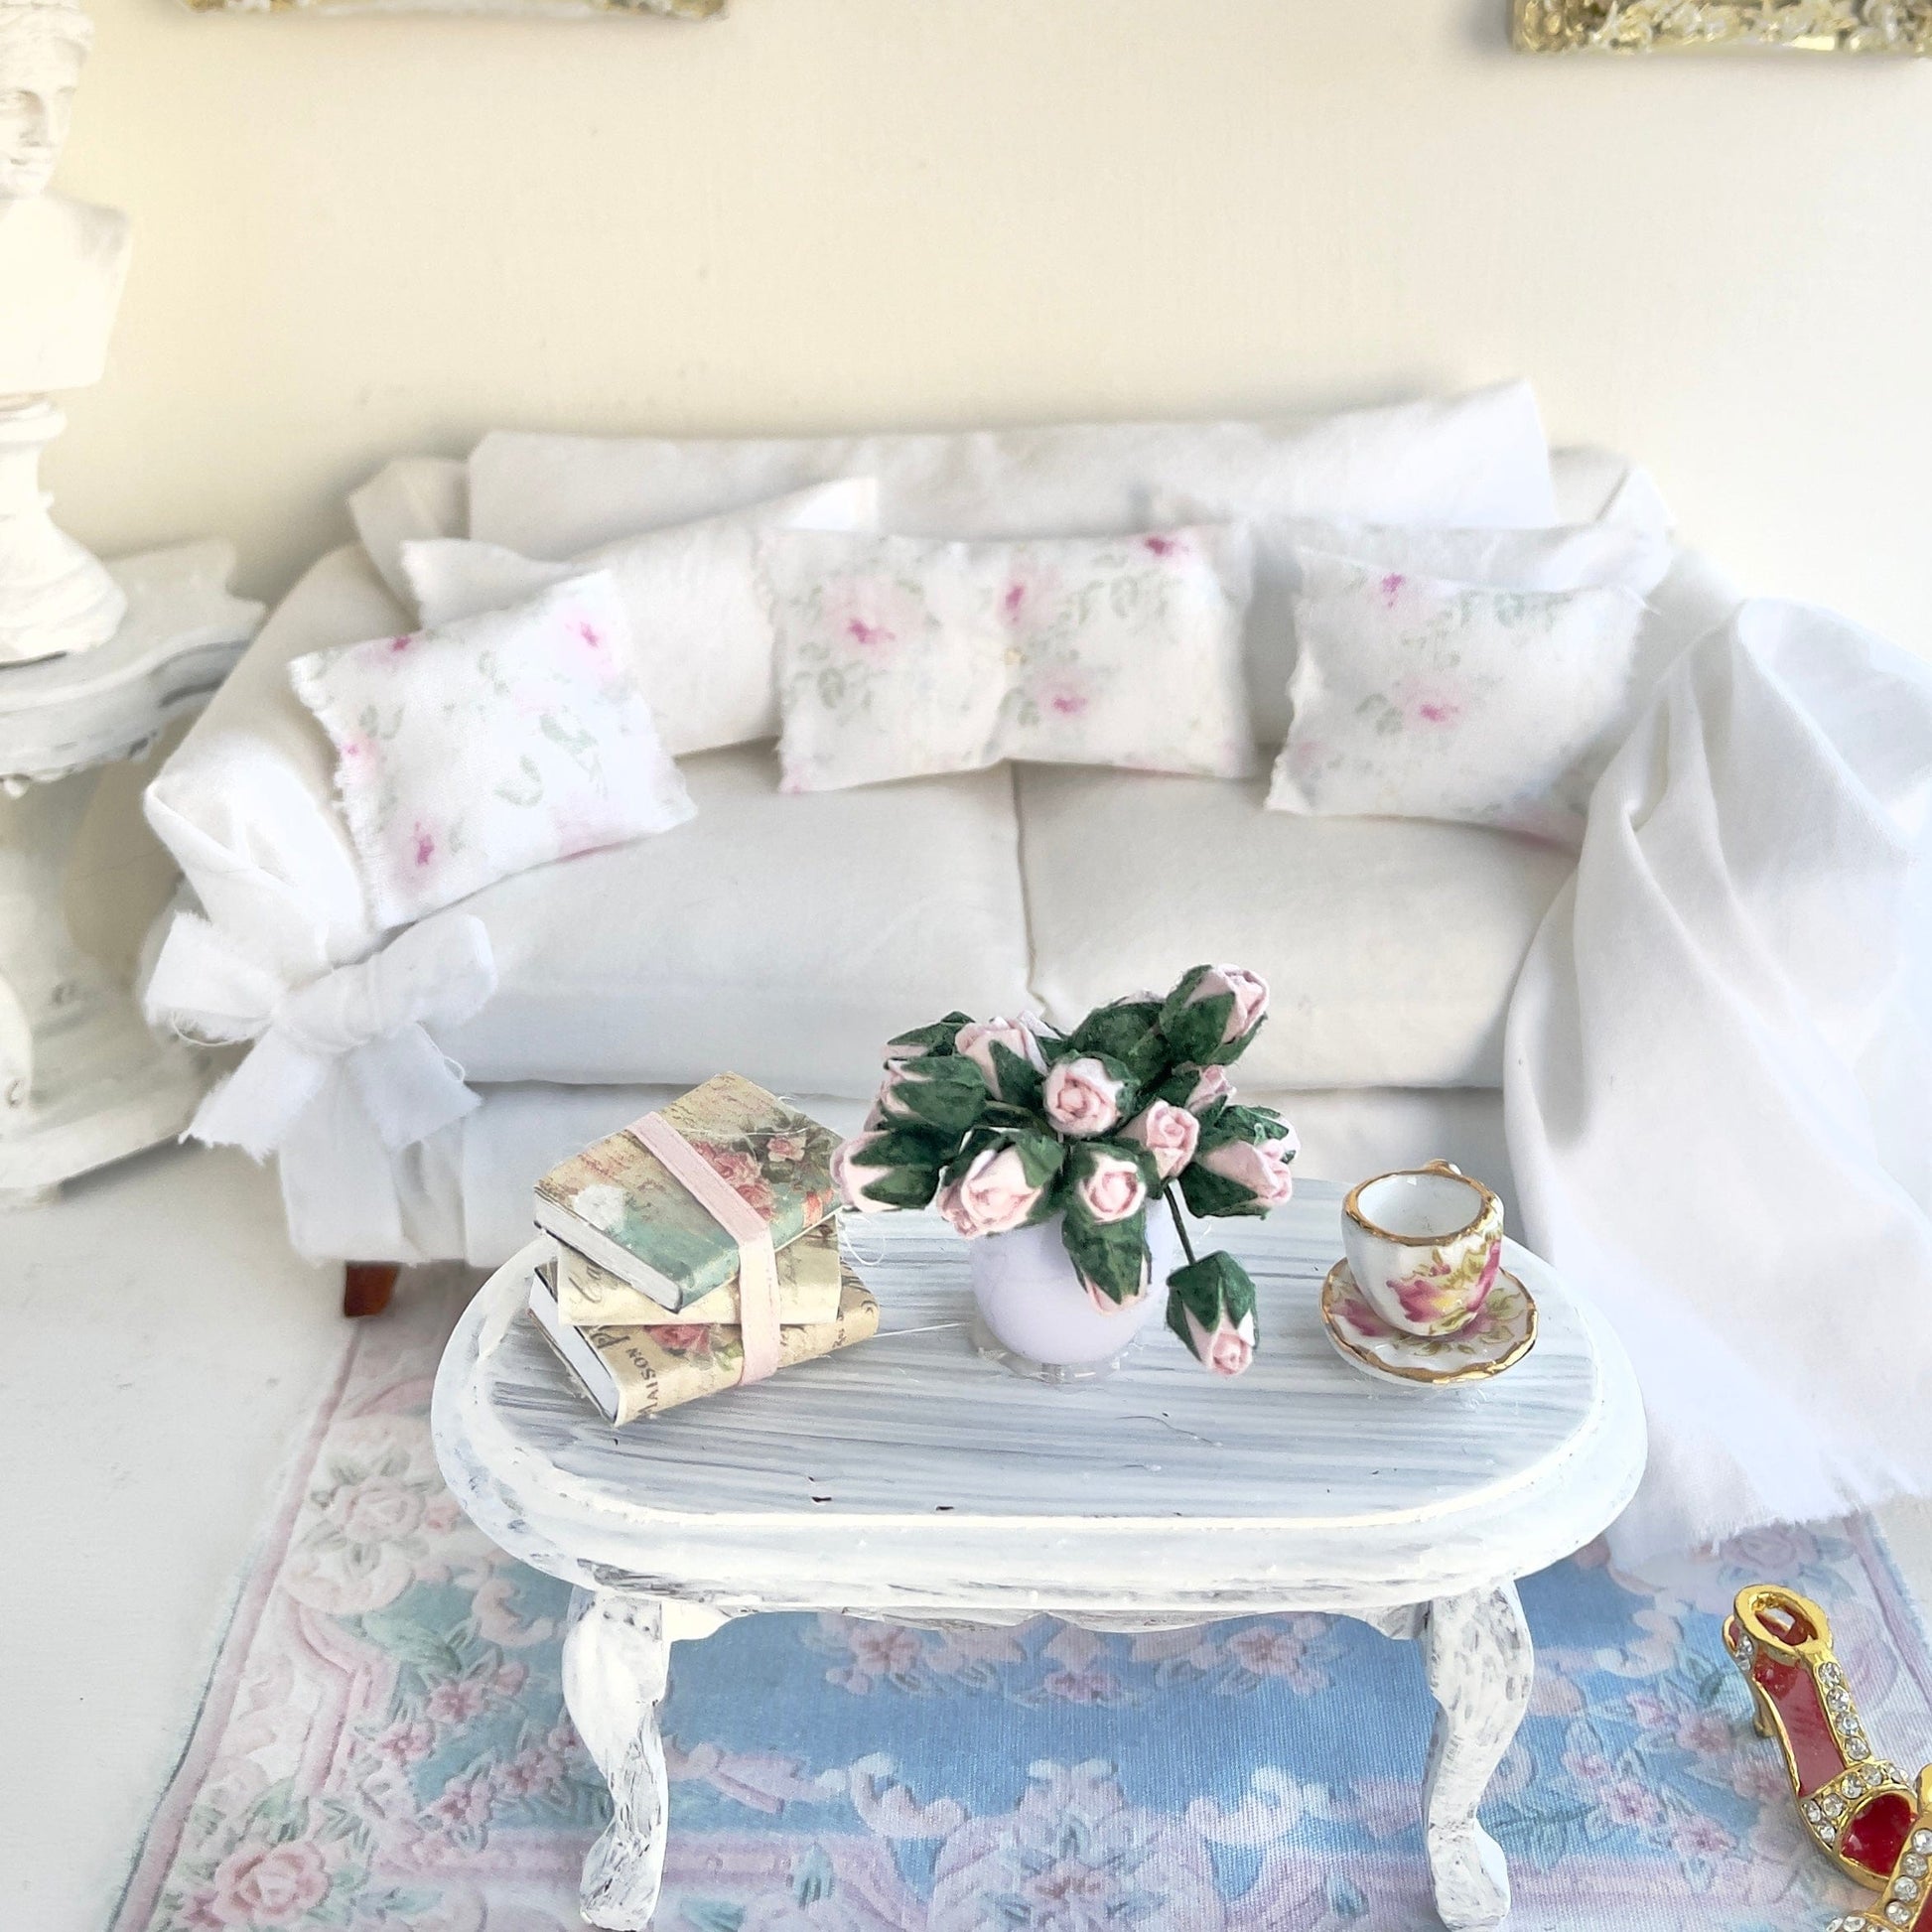 CHANTALLENA Pillow Set | Shabby Pink Roses with Blue Accents and Throw- 1:12 scale | Shabby 2